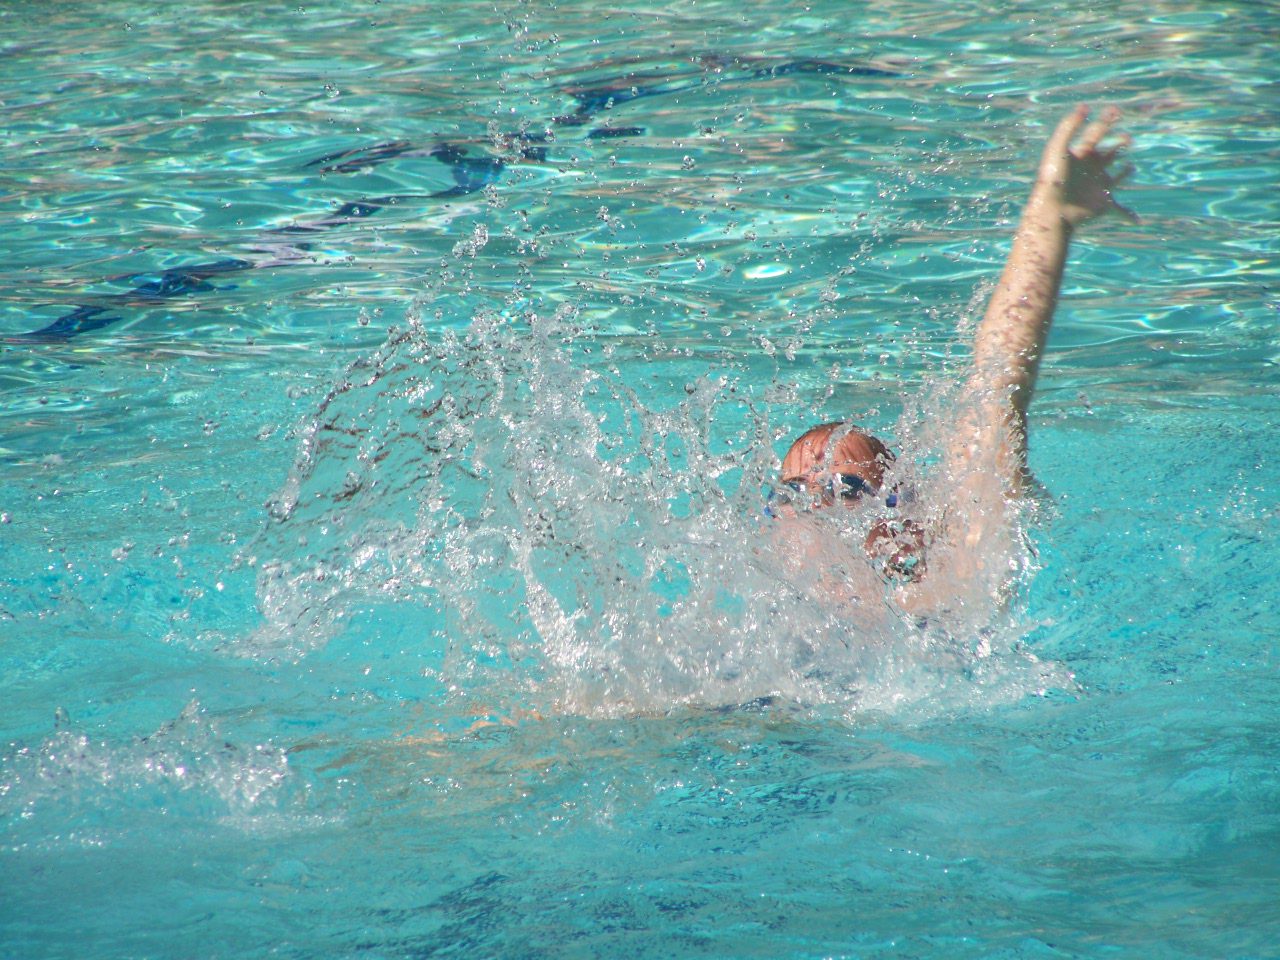 A person swimming in the water with their arms up.